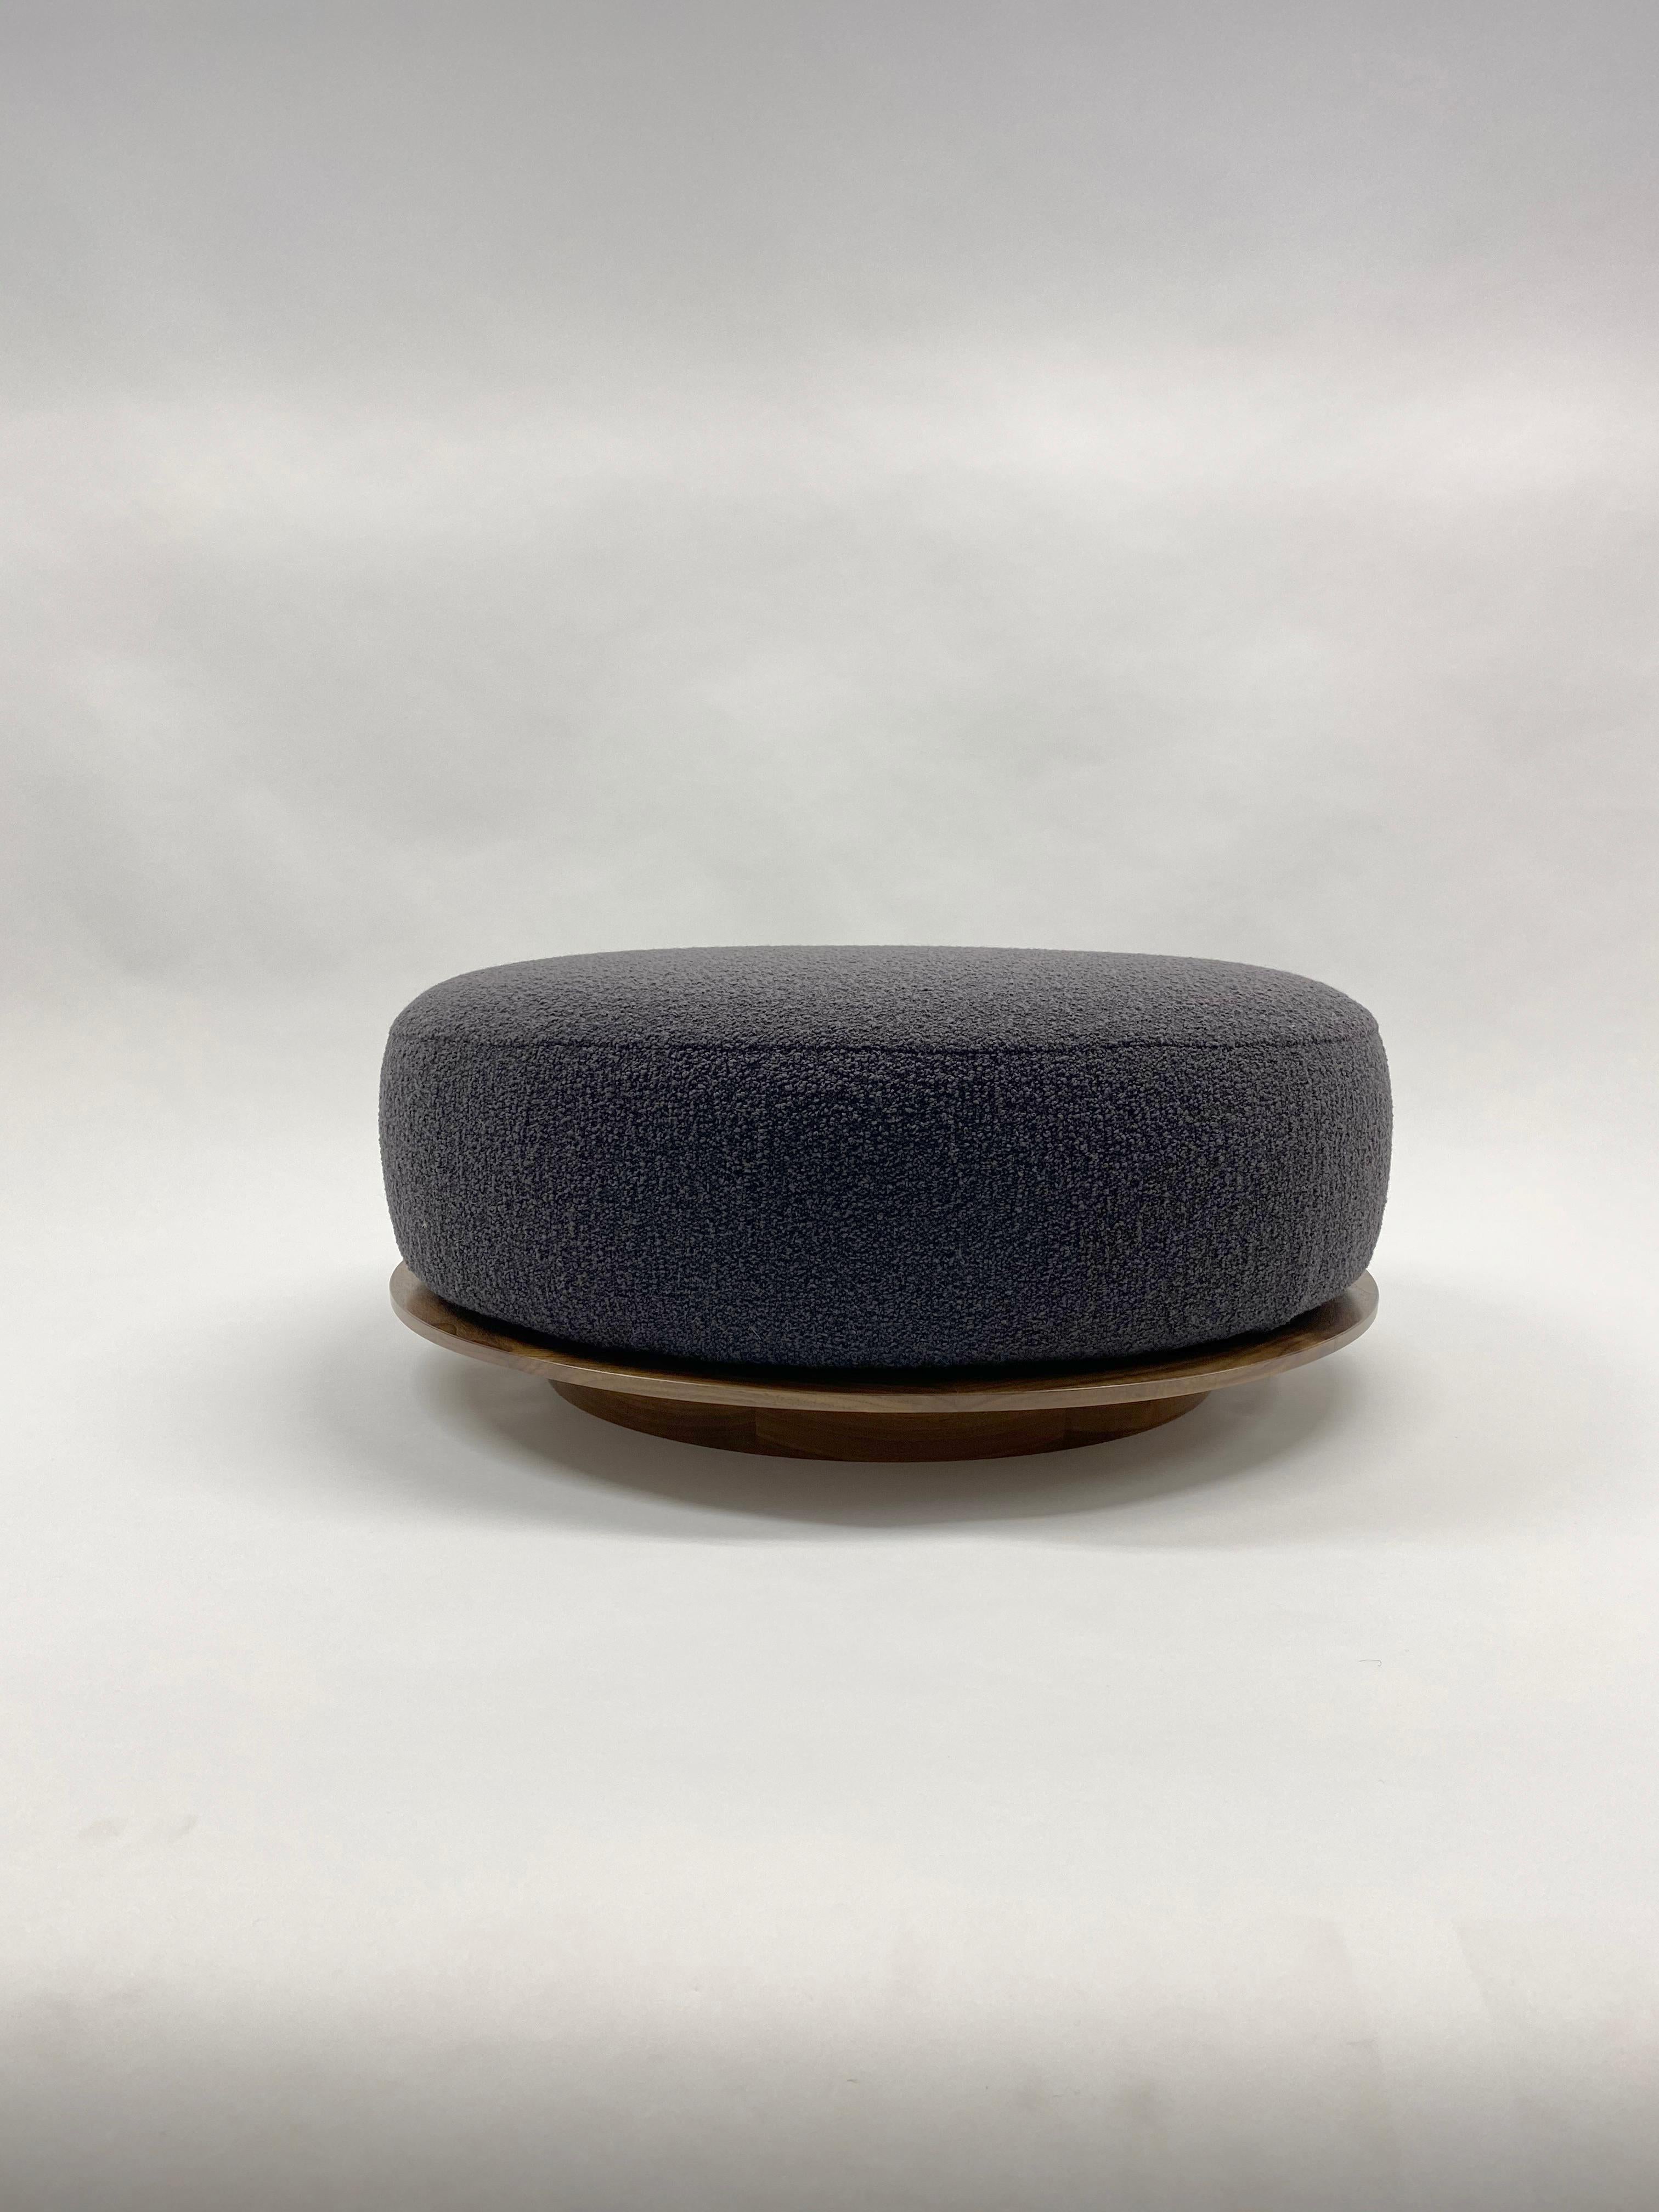 COM OR COL ONLY

The Torta ottoman is inspired by a cake sitting neatly on a dessert plate.

Can be configured in round and three sided and can be customized for virtually any size.

Pictured iwith Ebonized Walnut Base

Measures: 28